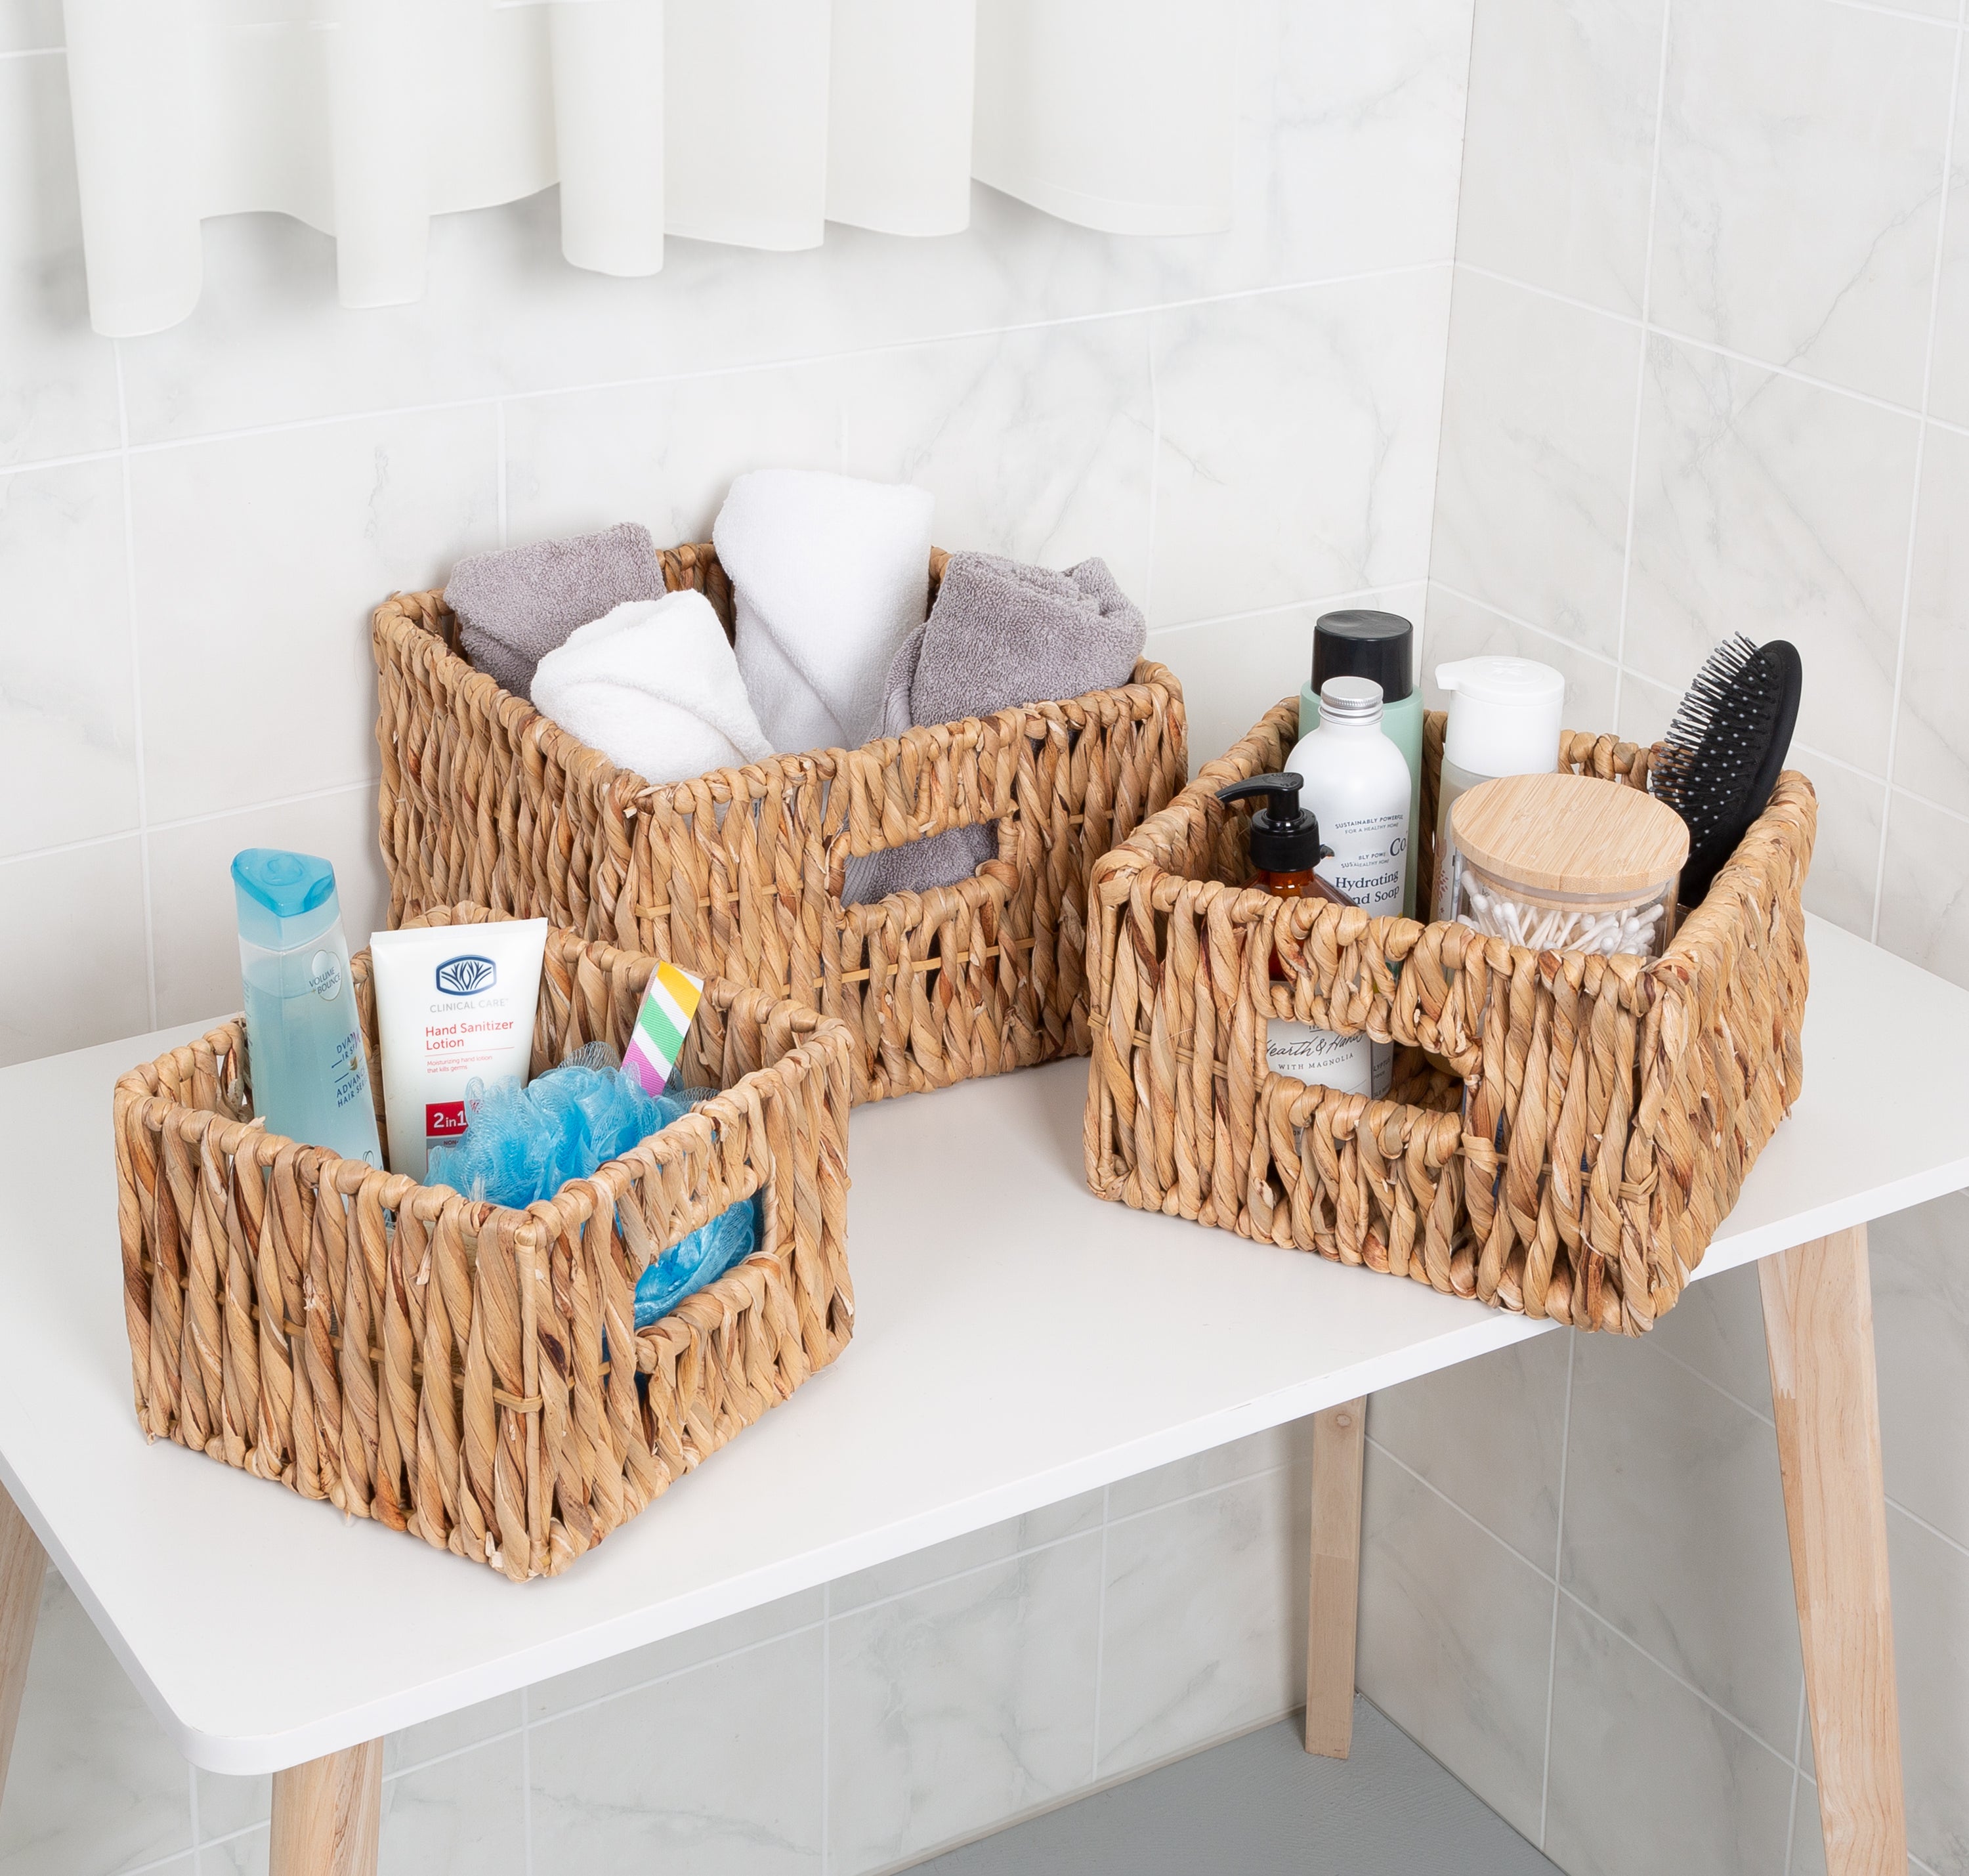 15 Pretty Ways To Organize With Baskets- A Cultivated Nest